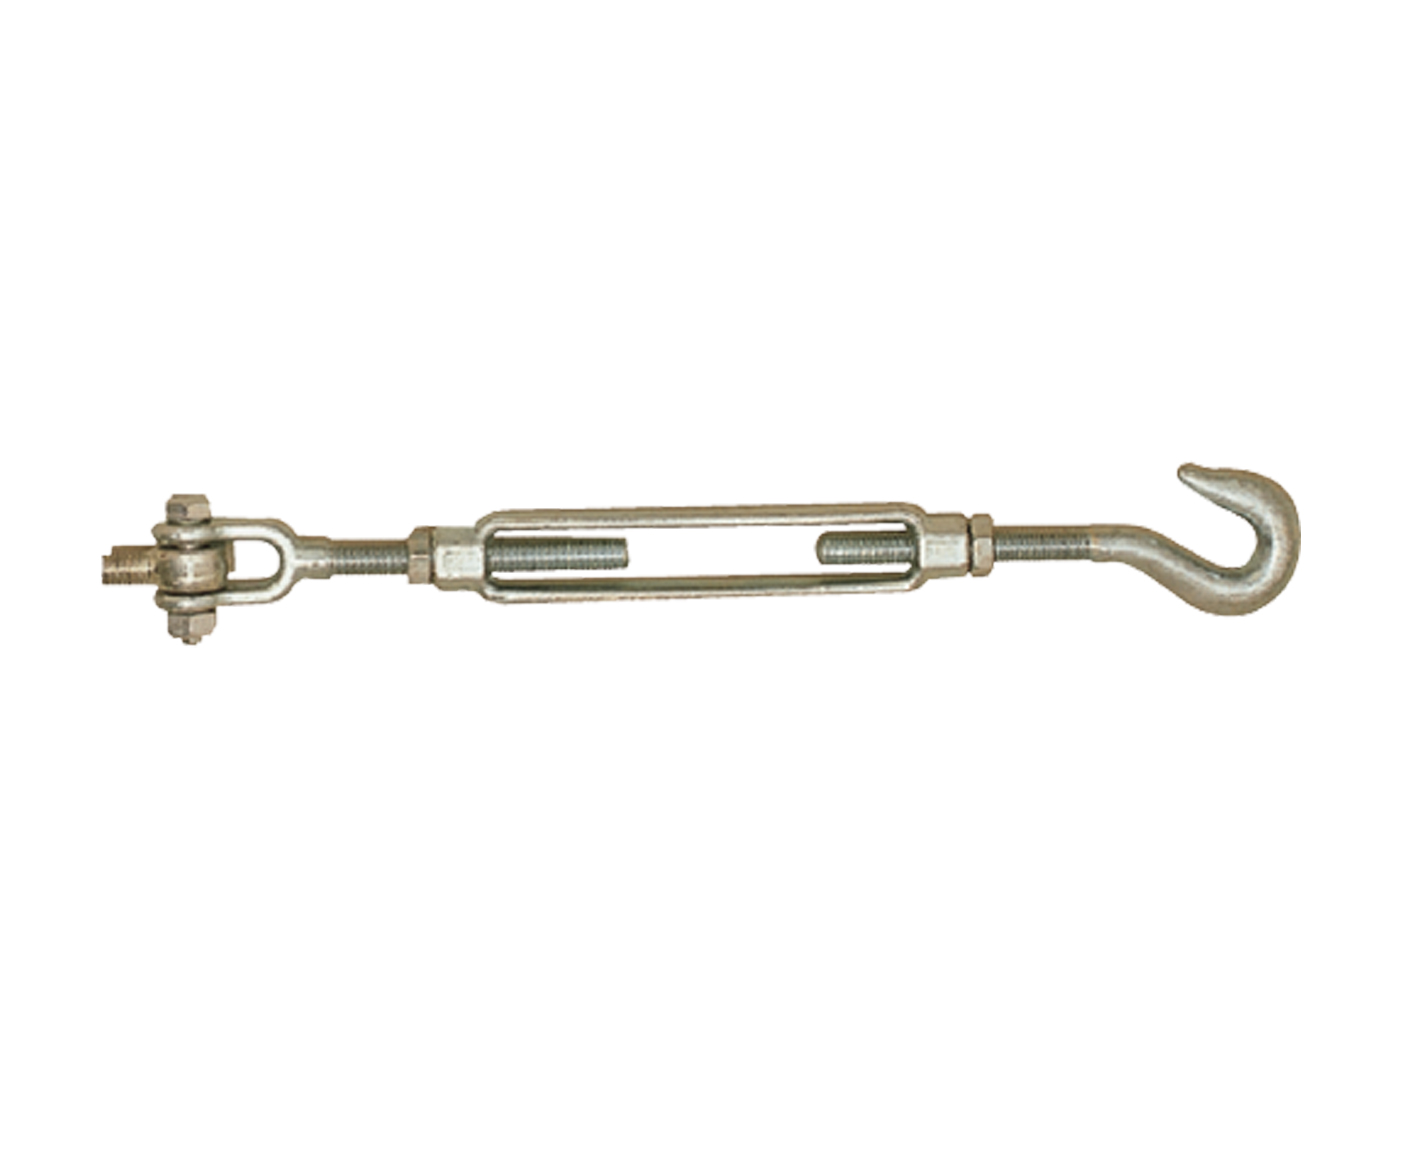 US Forged Hook And Hook Turnbuckle Manufacturers - Hilifting